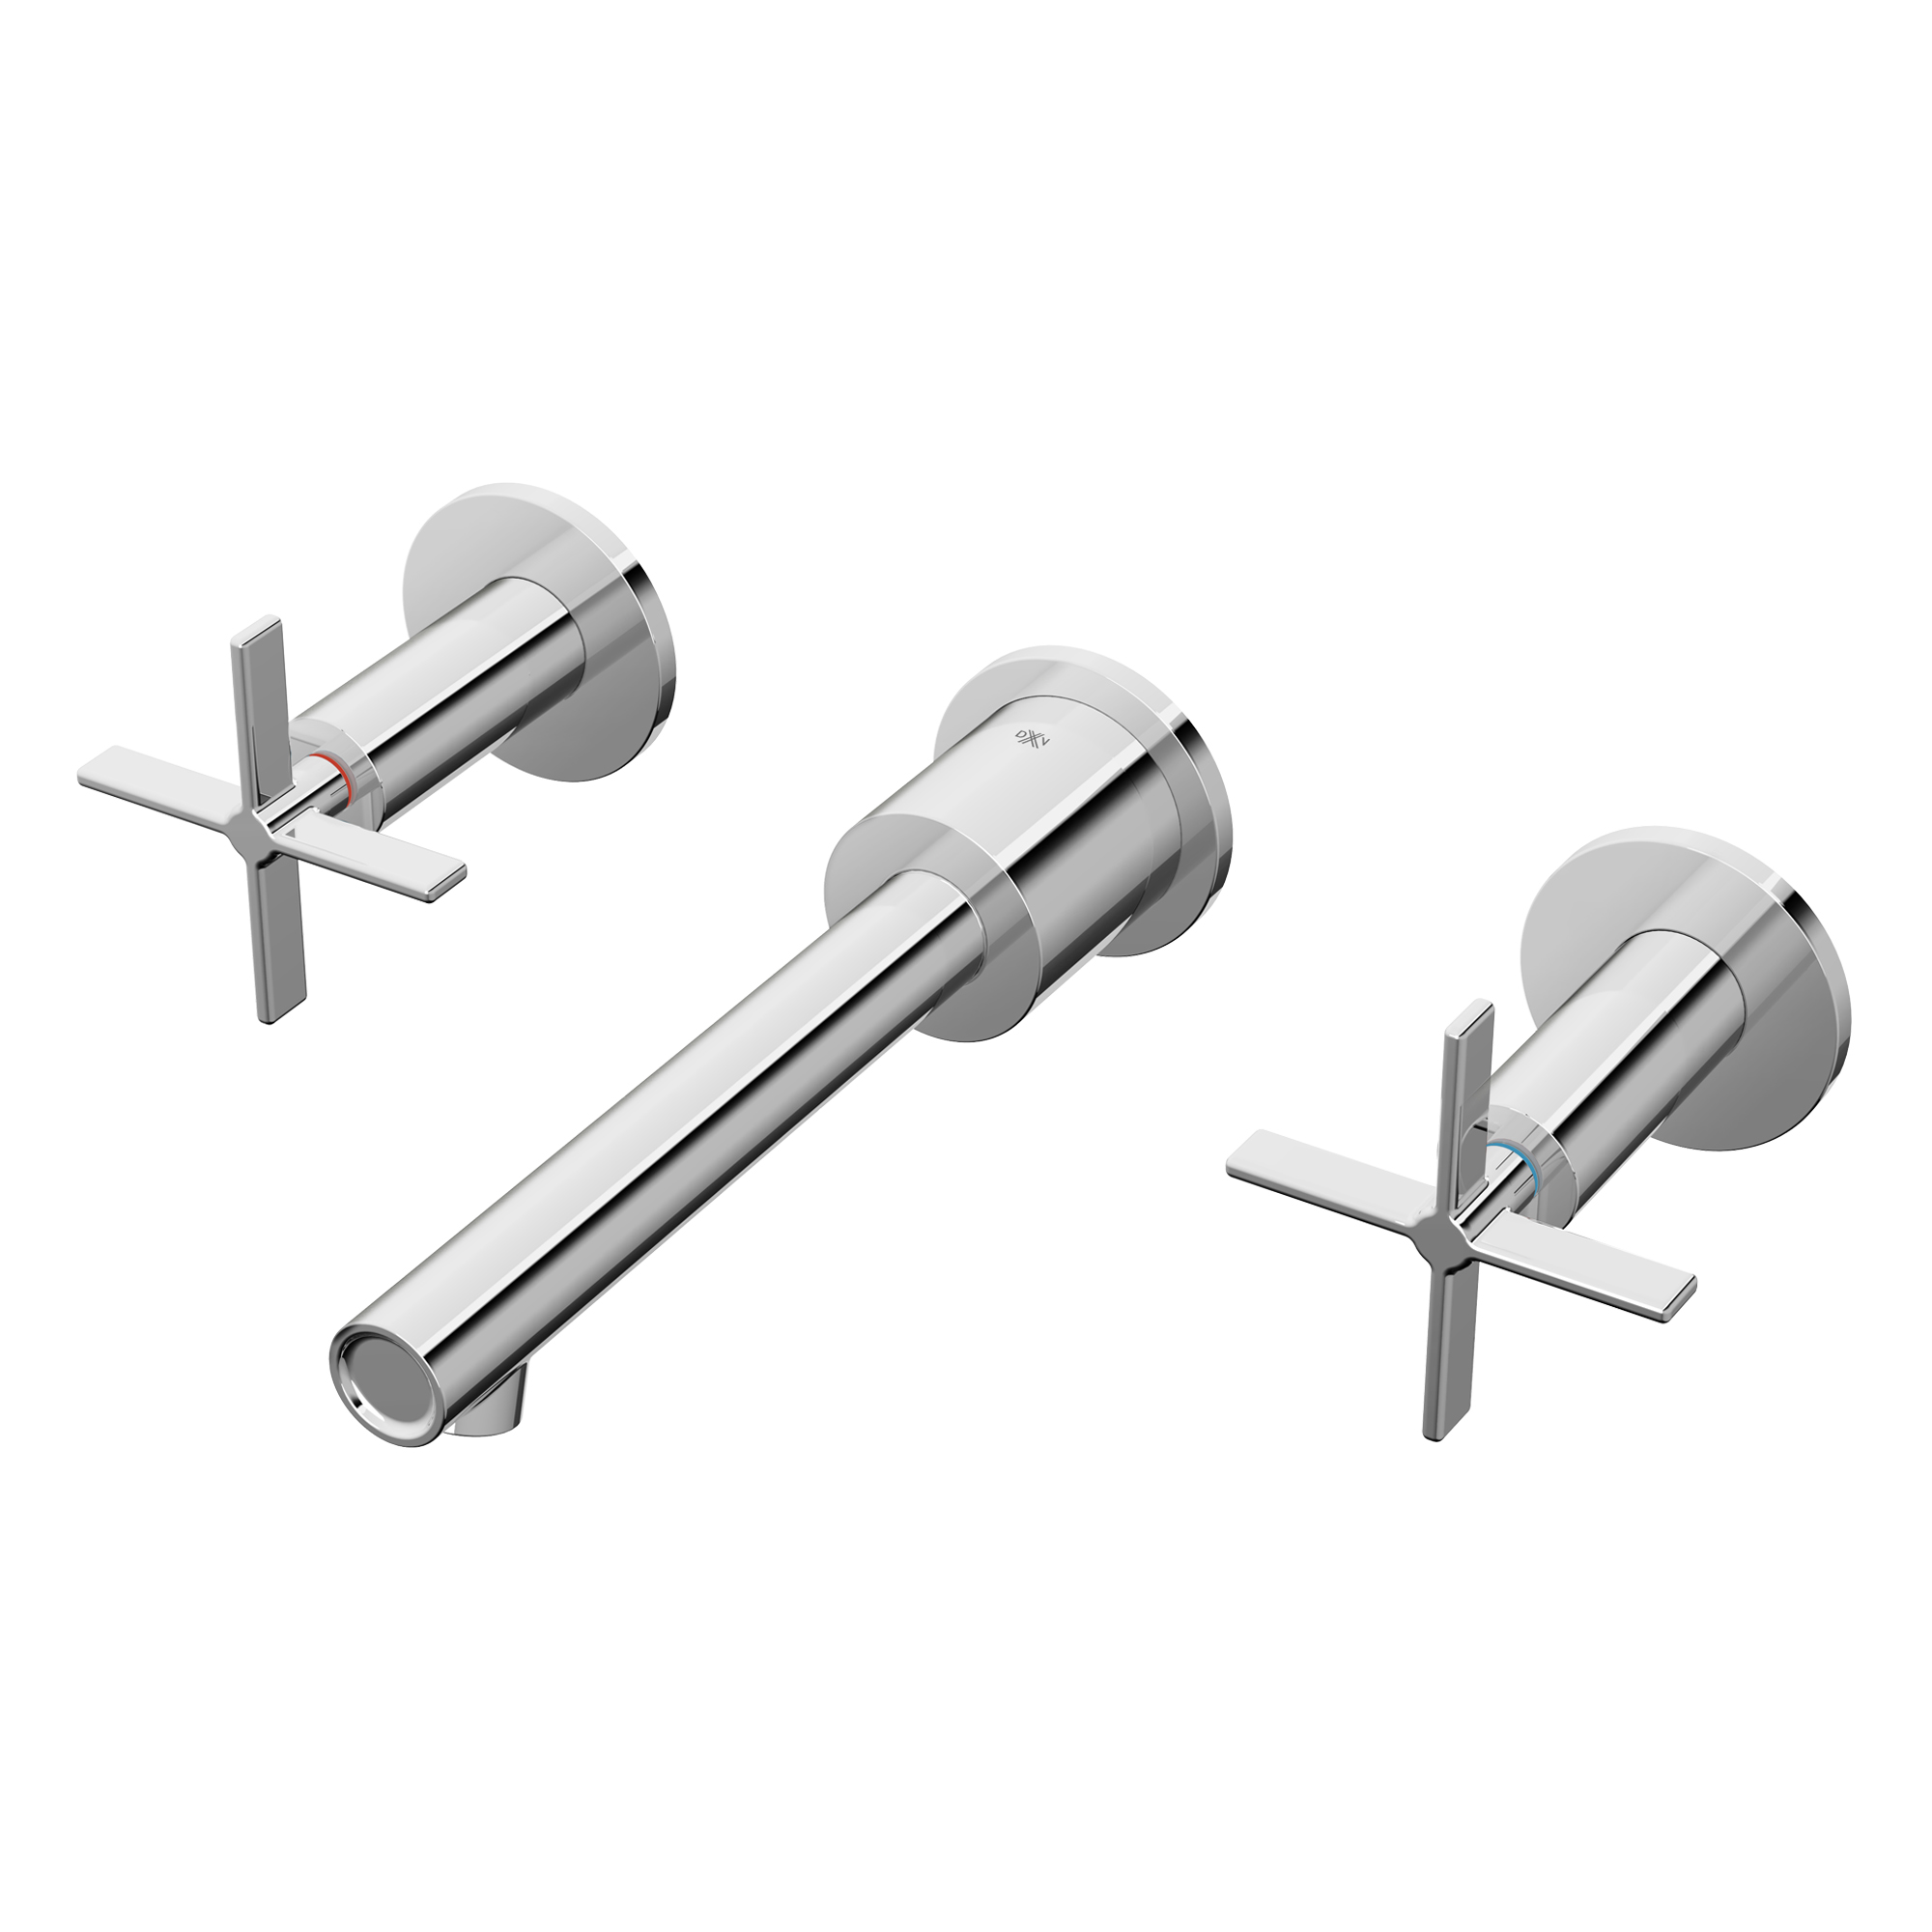 Percy 2-Handle Wall Mounted Bathroom Faucet with Indicator Markings and Cross Handles